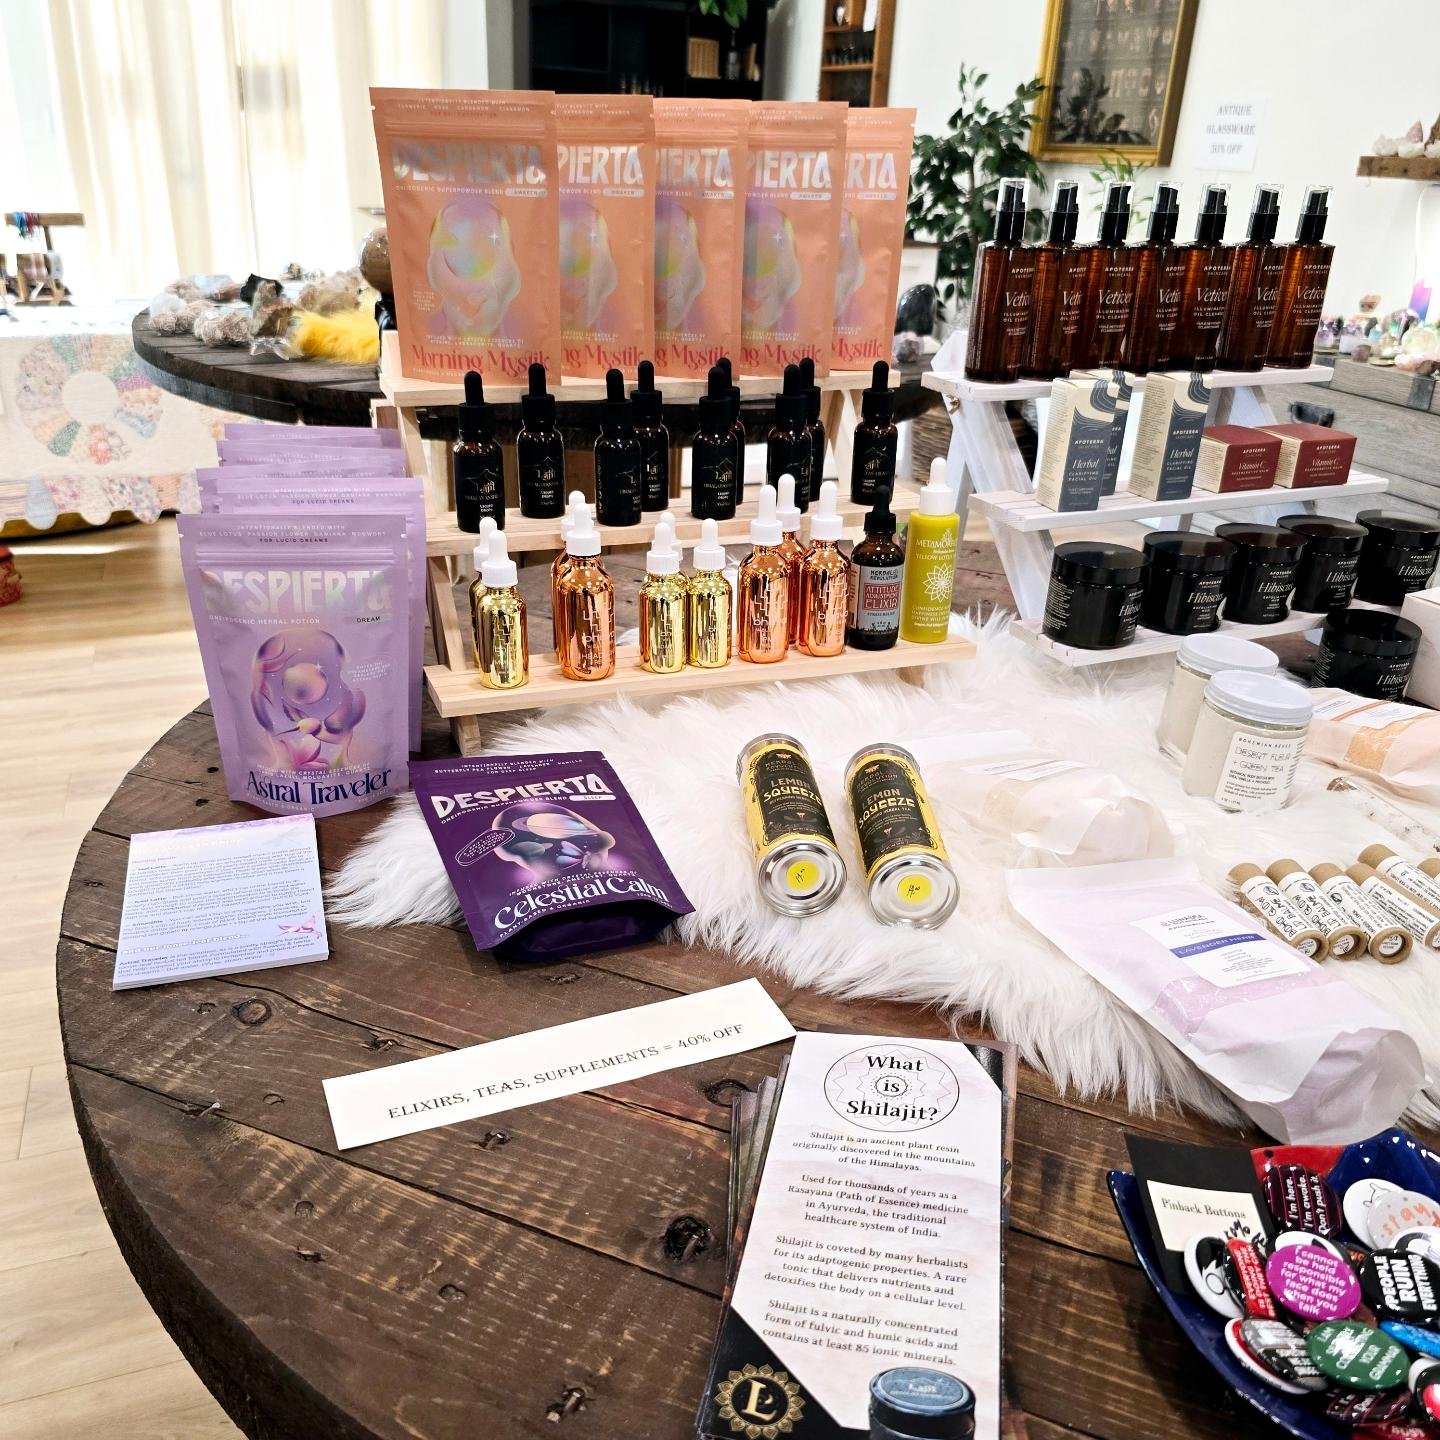 This is the only table that hasn't been picked through yet! ⁣
⁣
I use these premium elixirs &amp; body care products every day.⁣
⁣
🤯 Everything 40% off 😳⁣
⁣
All Are....⁣
Organic⁣
Vegan⁣
USA &amp; Woman Owned⁣
Ethically Sourced⁣
The Shit!⁣
⁣
Open ti